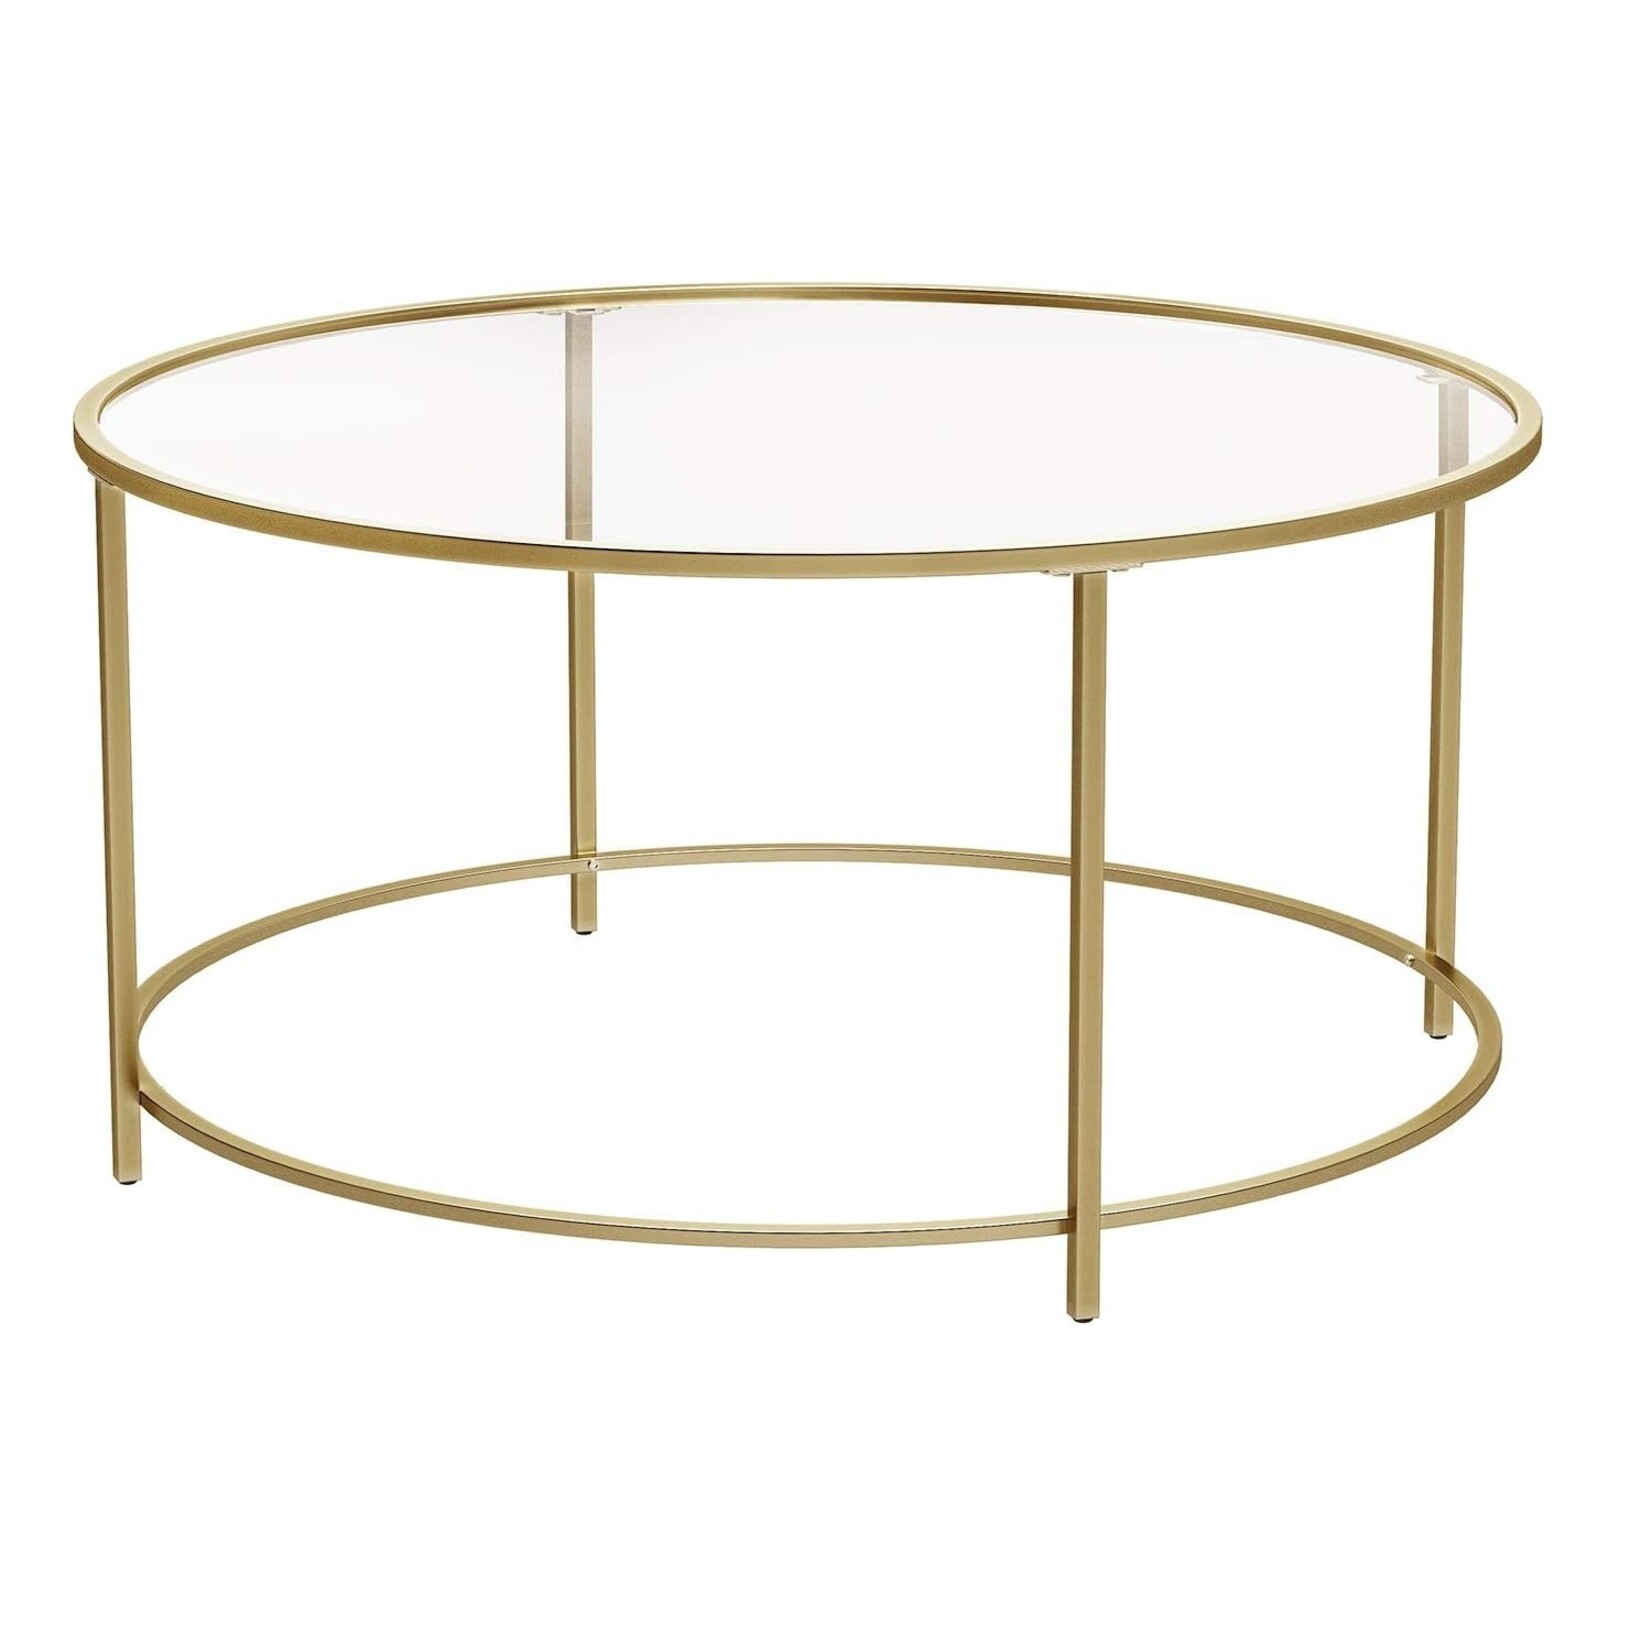 Bobbel Home Bobbel Home - Round Coffee Table - Glass Plate - Metal Frame - Coffee Table - Gold